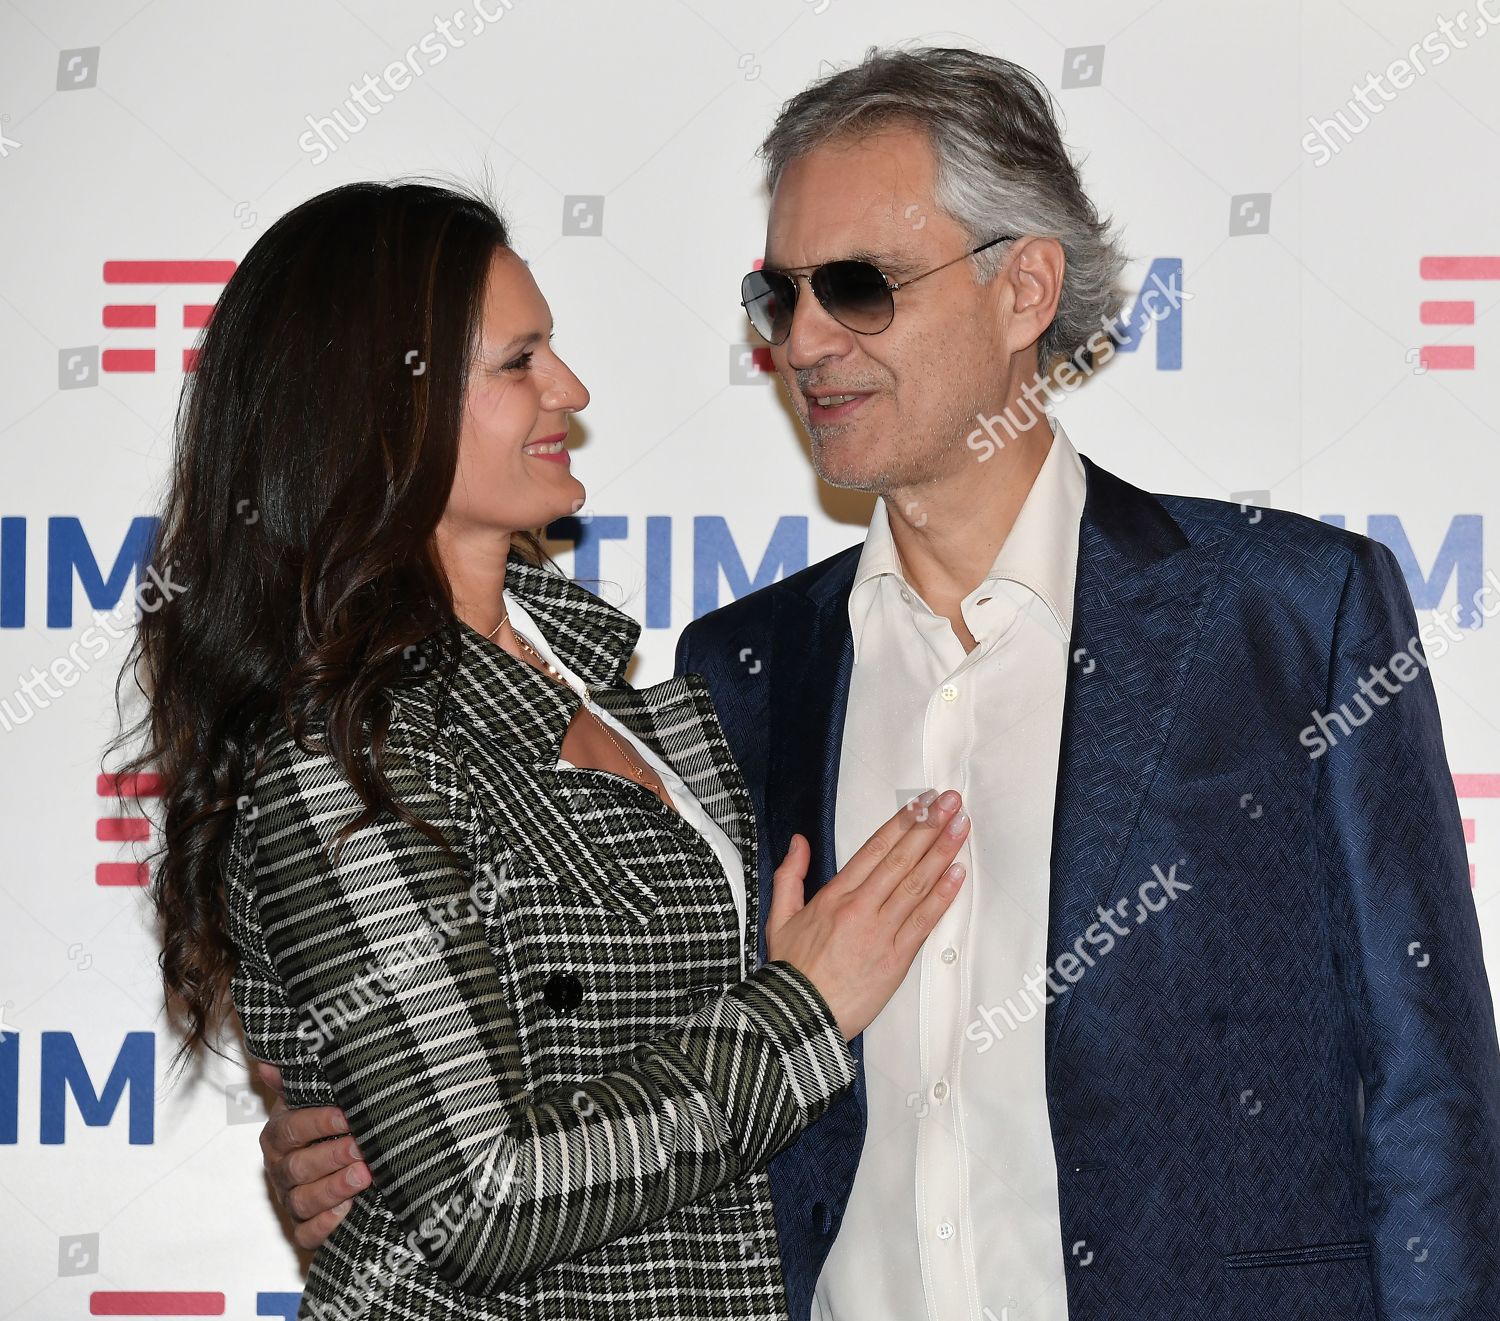 Andrea bocelli wife pictures, free galleries of mature females